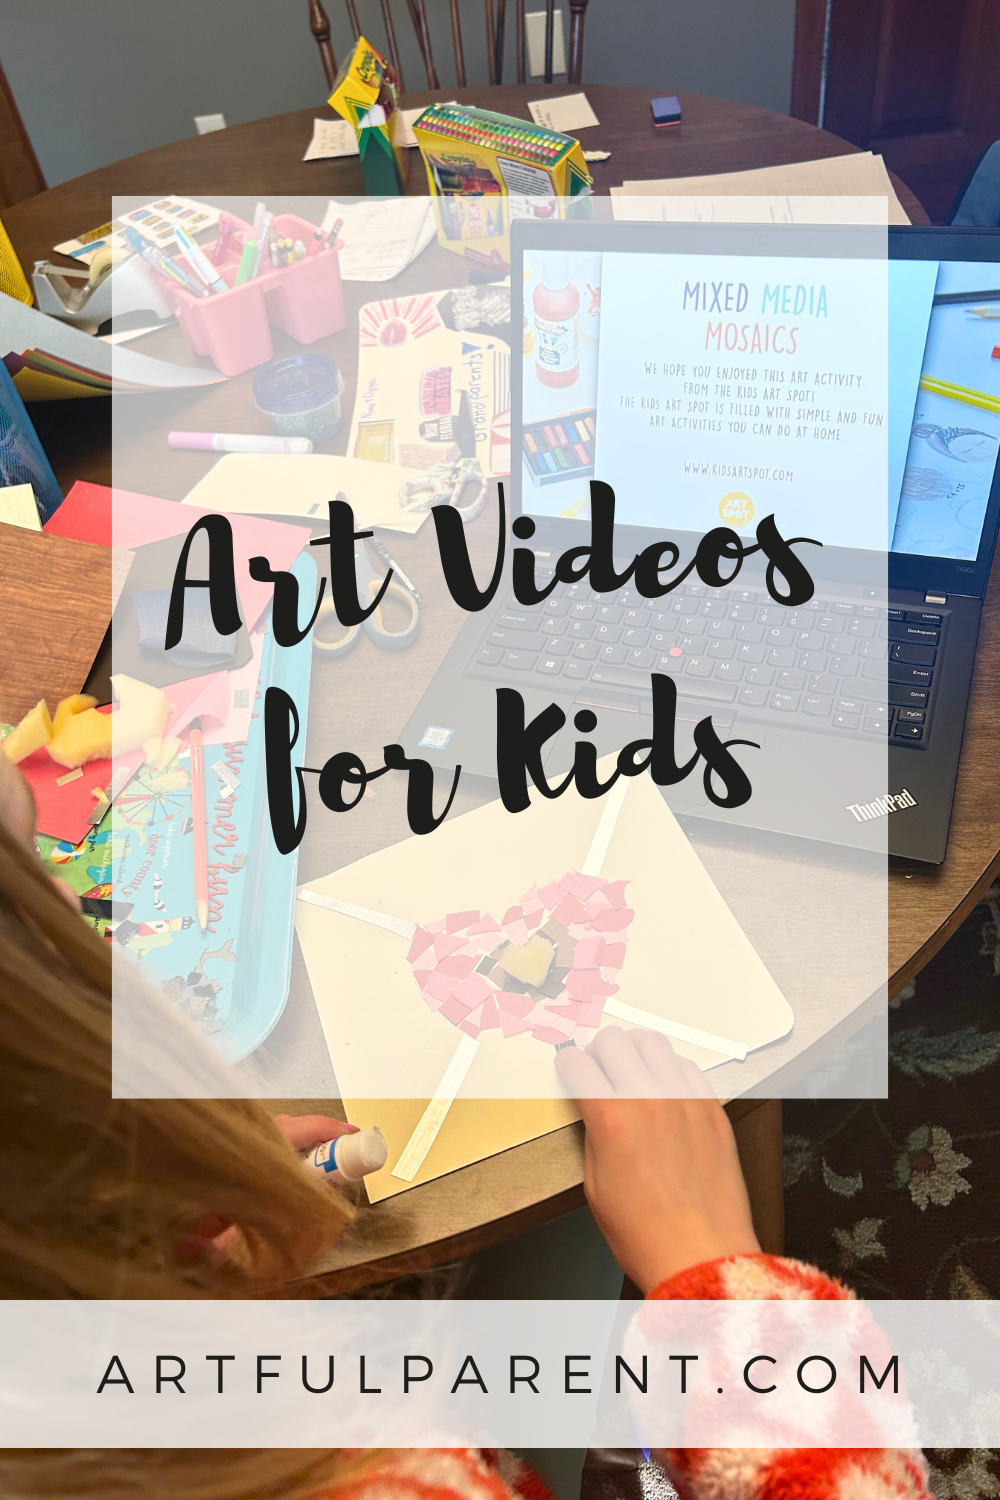 The Power of Art Videos for Kids